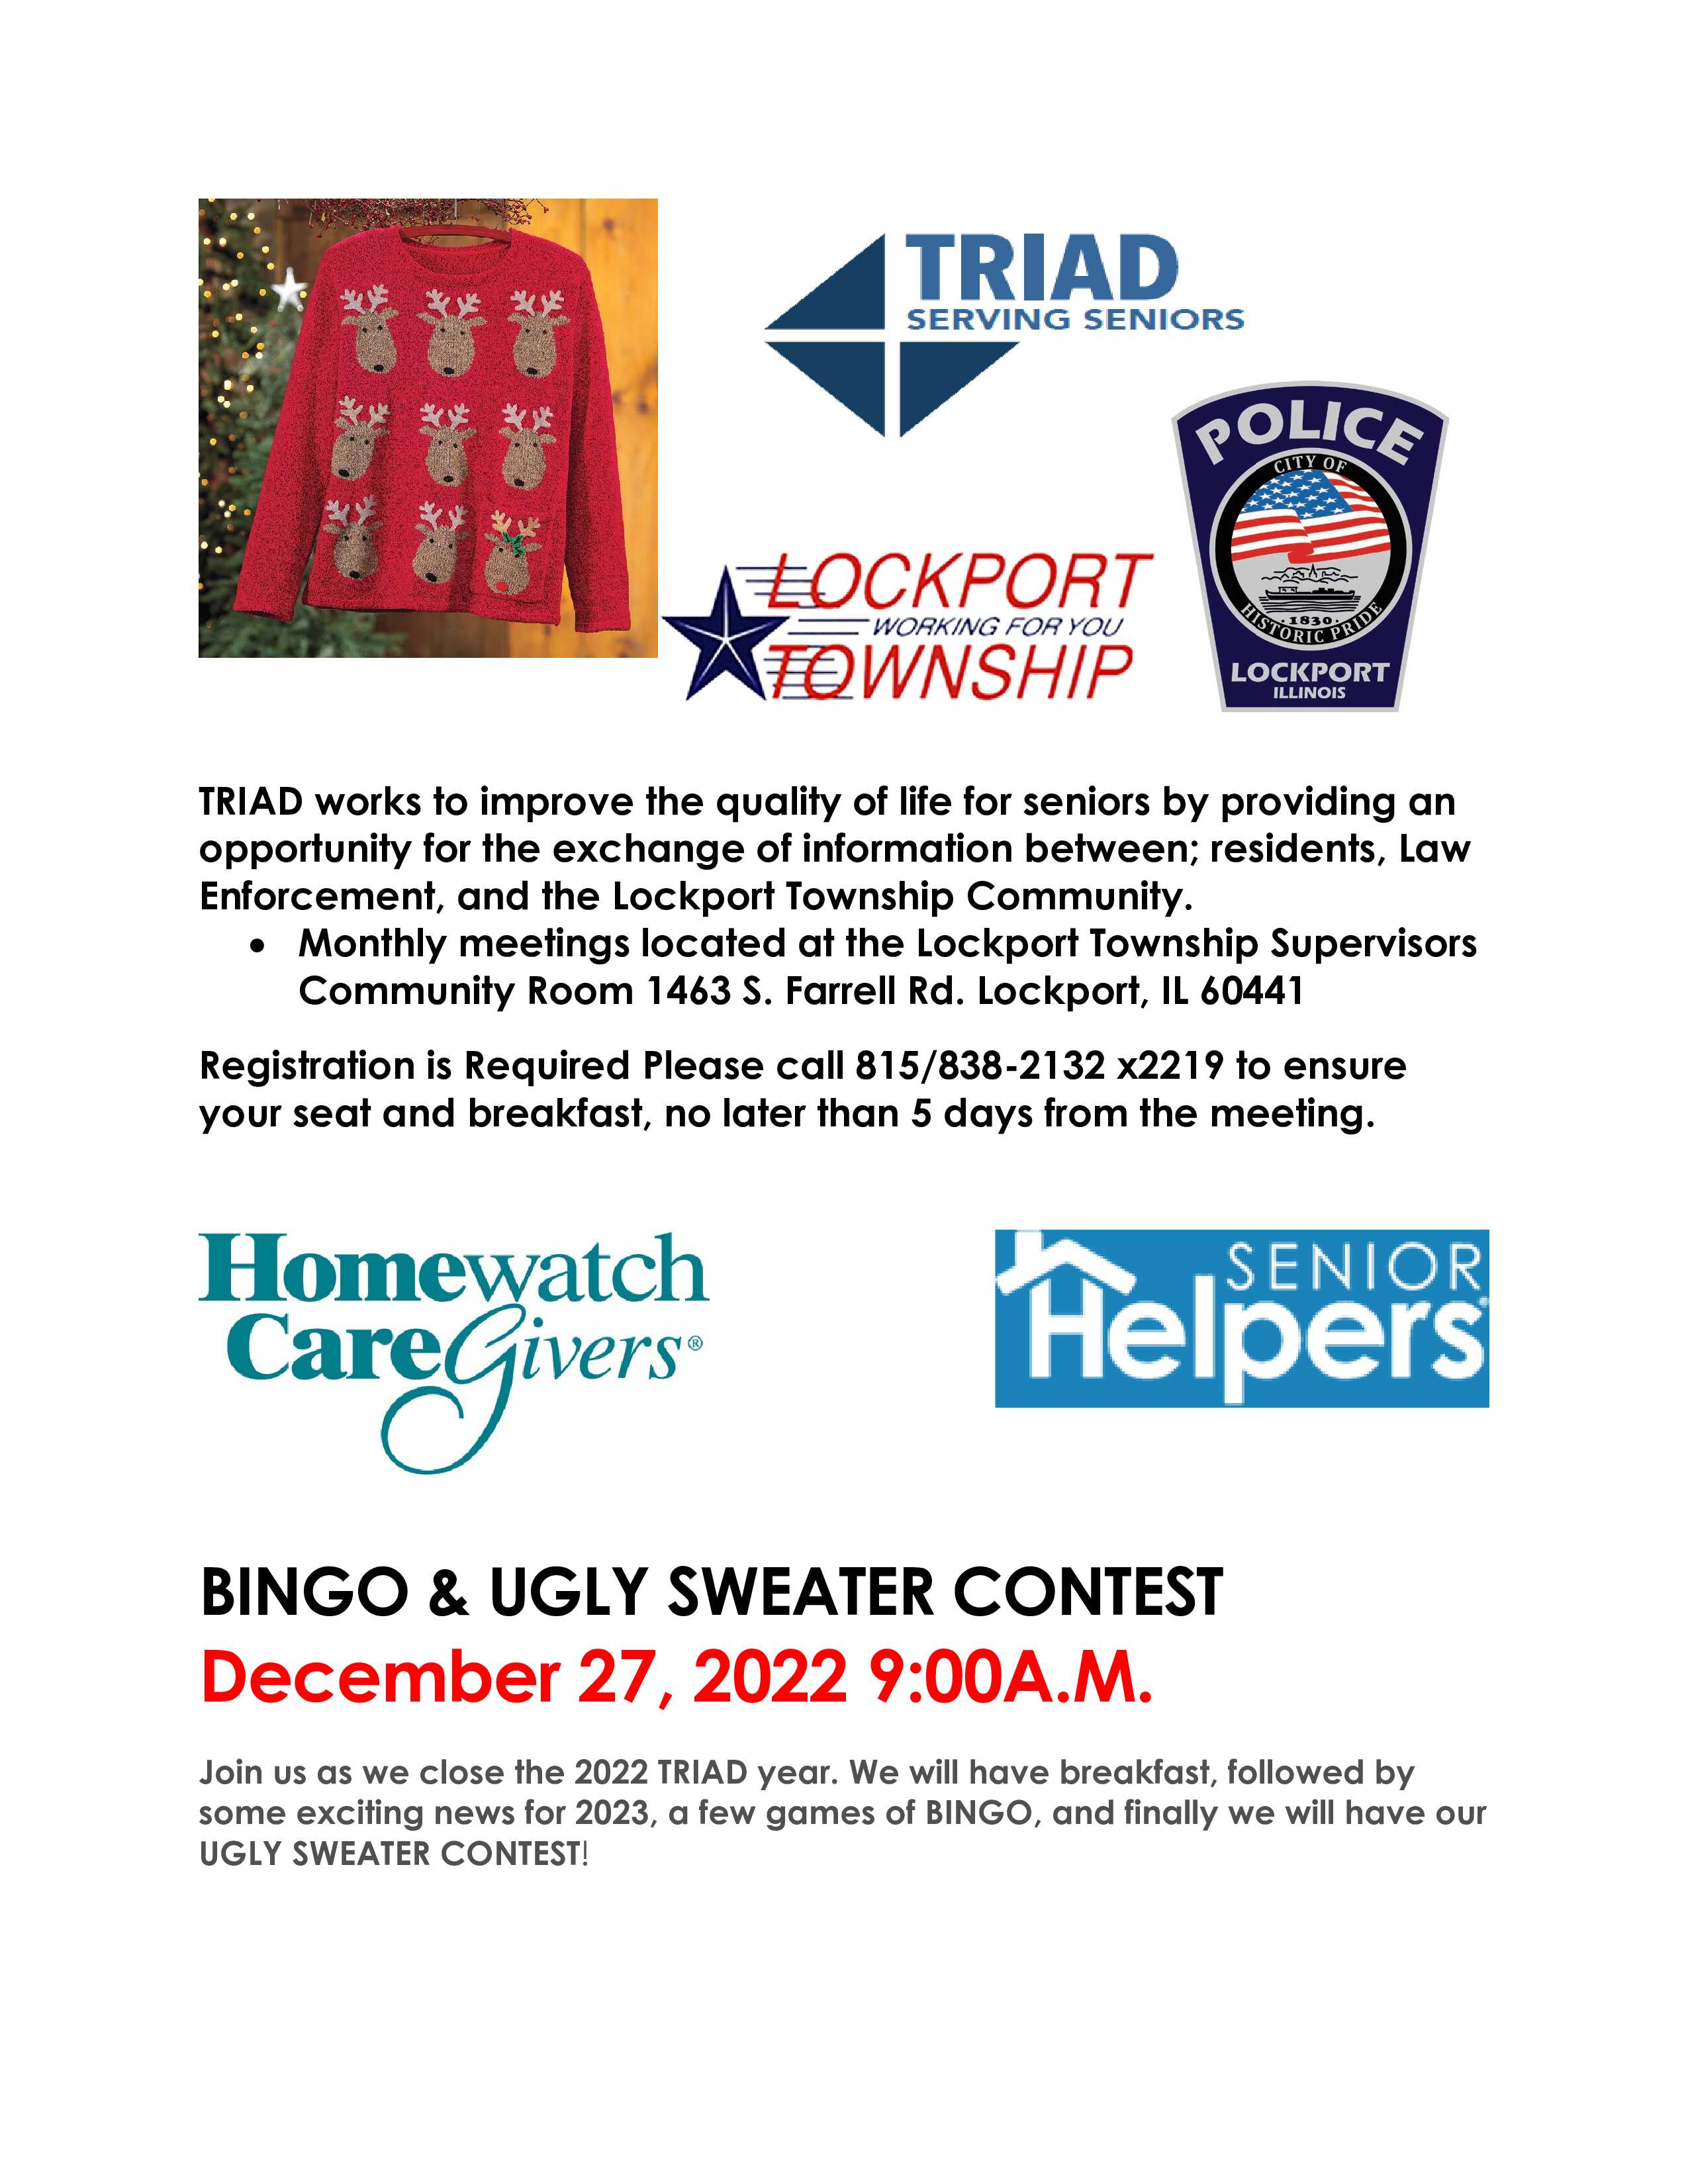 bingo and ugly sweater contest flyer 